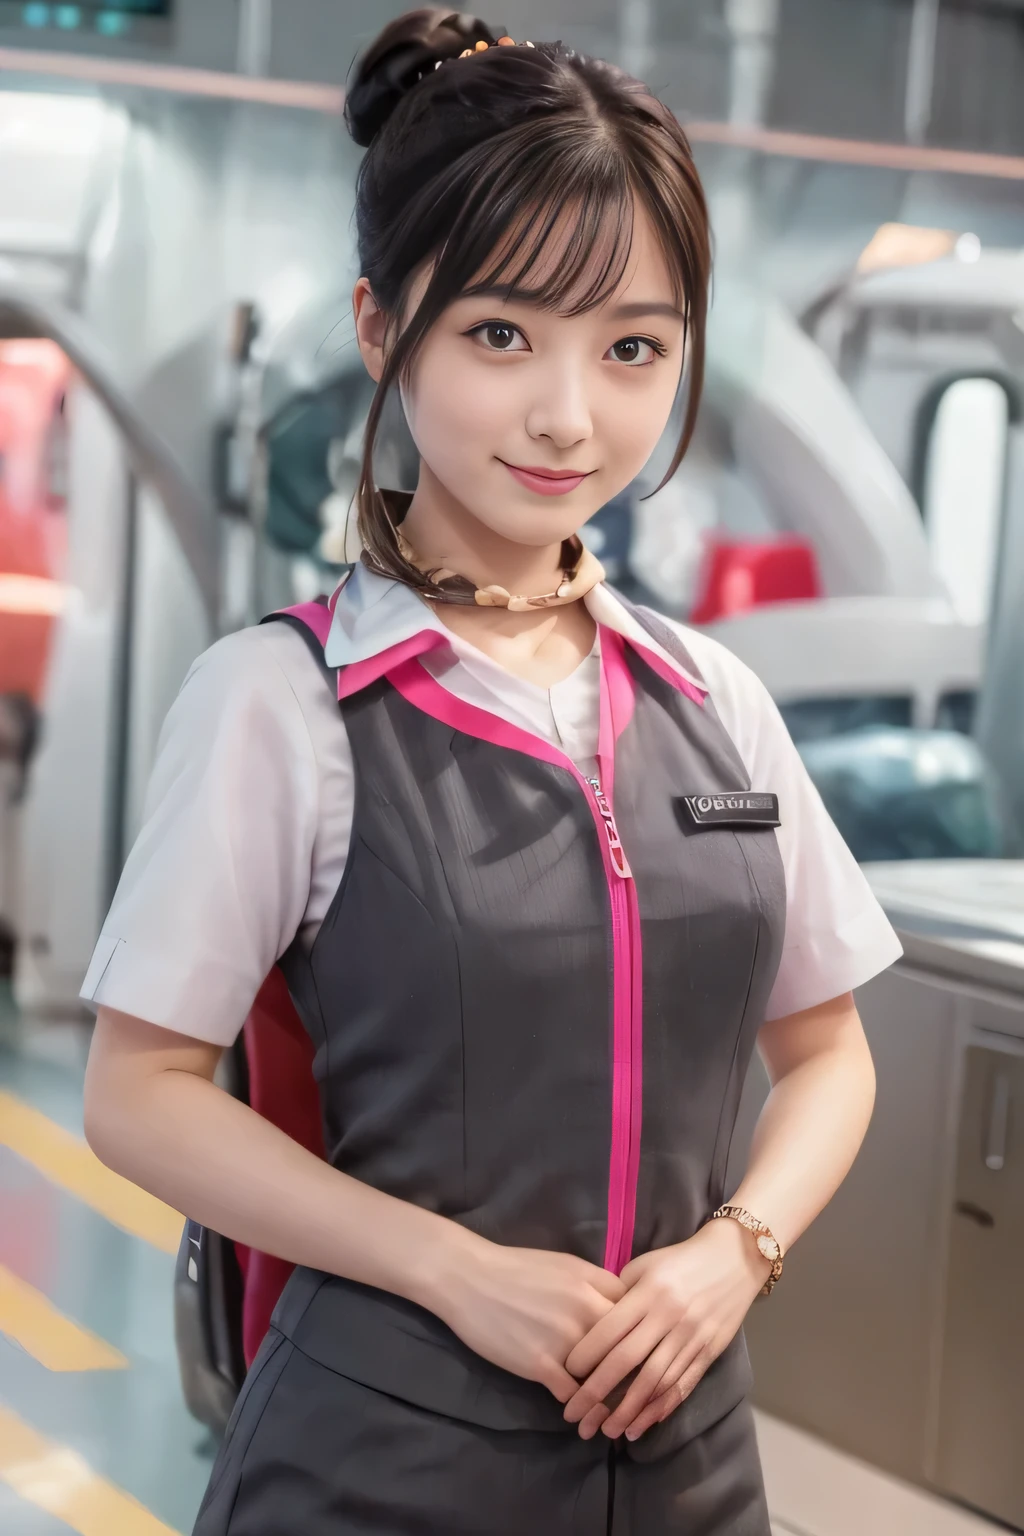 (masterpiece:1.2, highest quality:1.2), 32K HDR, High resolution, (alone、1 girl)、（At the station platform、Professional Lighting）、Background of an empty station platform、（Realistic style of JR Gran Class crew wearing uniform）、Short sleeve blouse、a scarf around the neck、（JR Gran Class flight attendant uniform with pink parts on the skirt sleeves）、（JR Gran Class flight attendant uniform with pink line on front zipper of vest）、Dark brown hair、（Hair tied up、Hair Bun、Hair Bun）、Dark brown hair、Long Shot、Big Breasts、（（Great hands：2.0）），（（Harmonious body proportions：1.5）），（（Normal limbs：2.0）），（（Normal finger：2.0）），（（Delicate eyes：2.0）），（（Normal eyes：2.0））)、Luxury Necklace、smile、Beautiful standing posture,Place your hands around your stomach